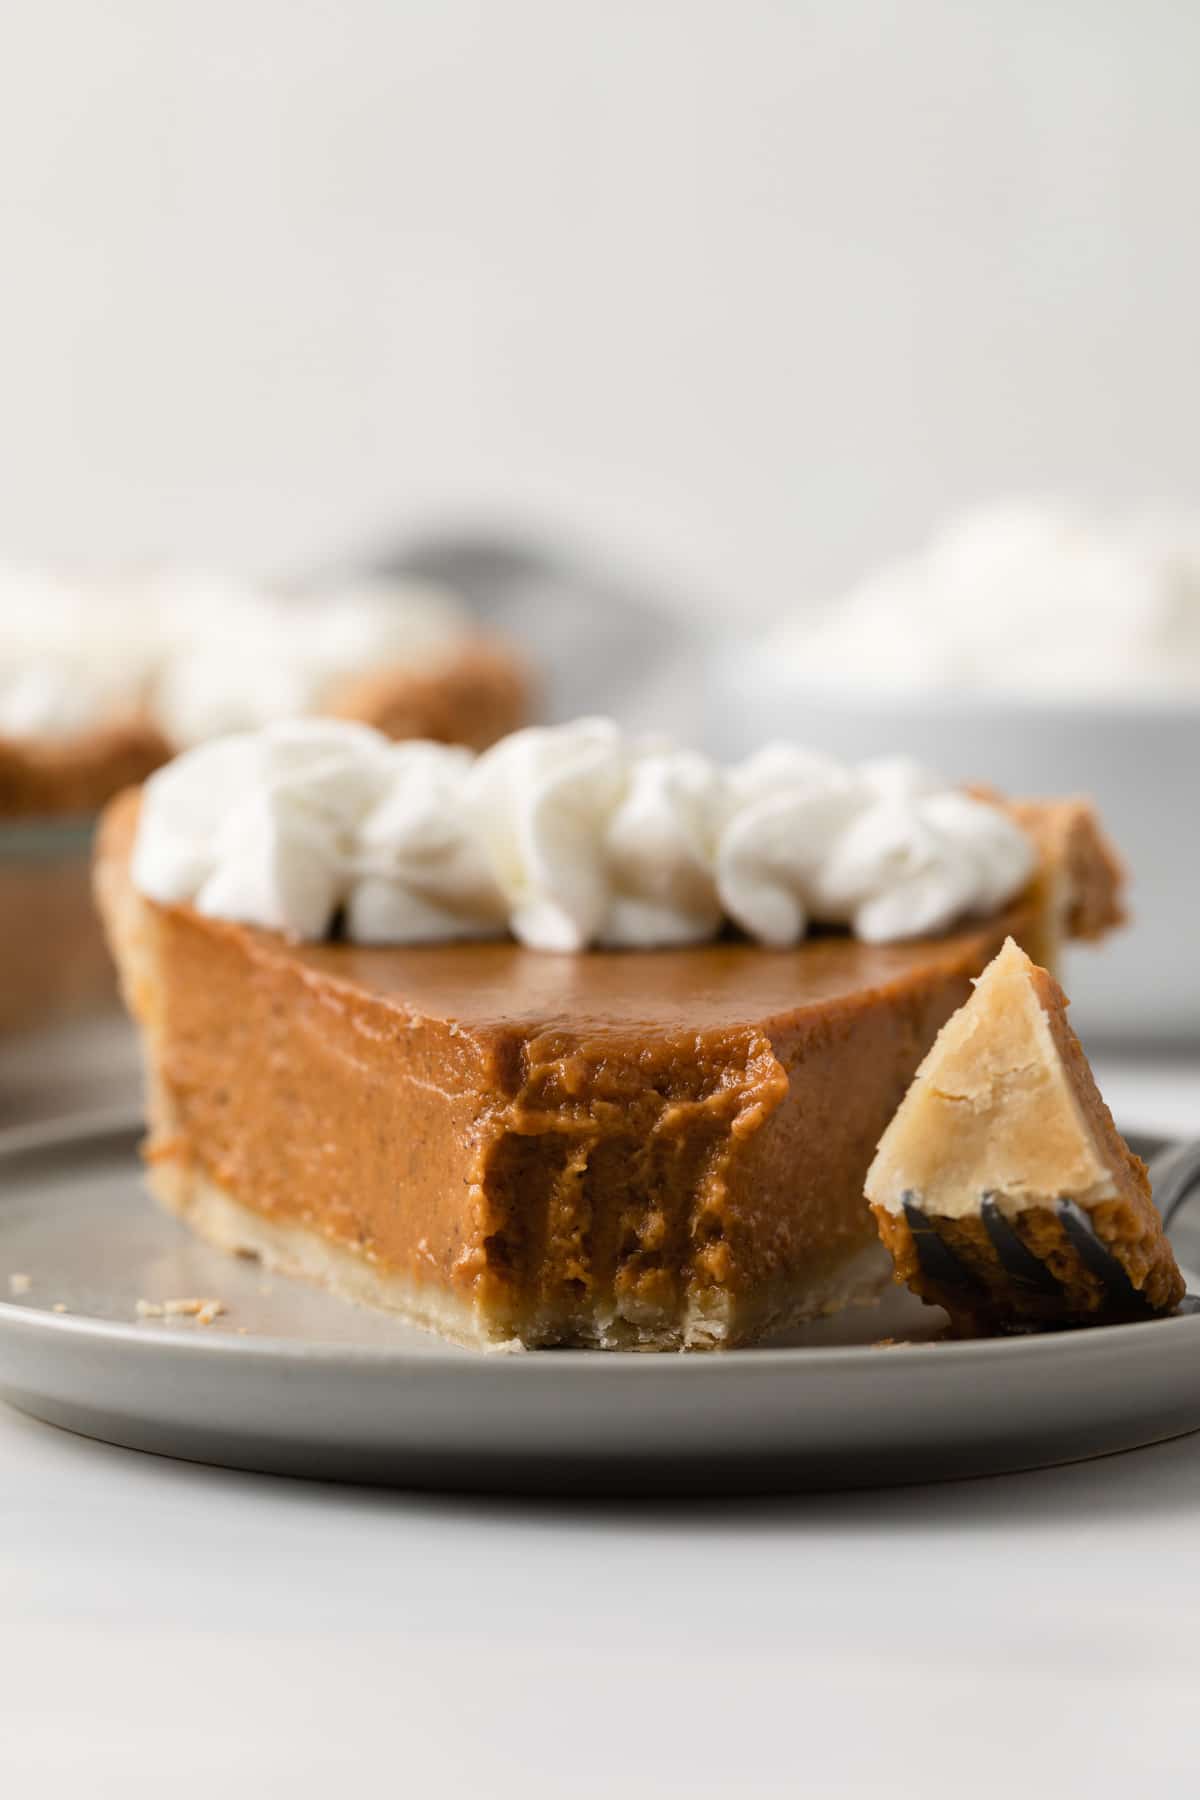 front view of pumpkin pie slice with bite taken out on fork